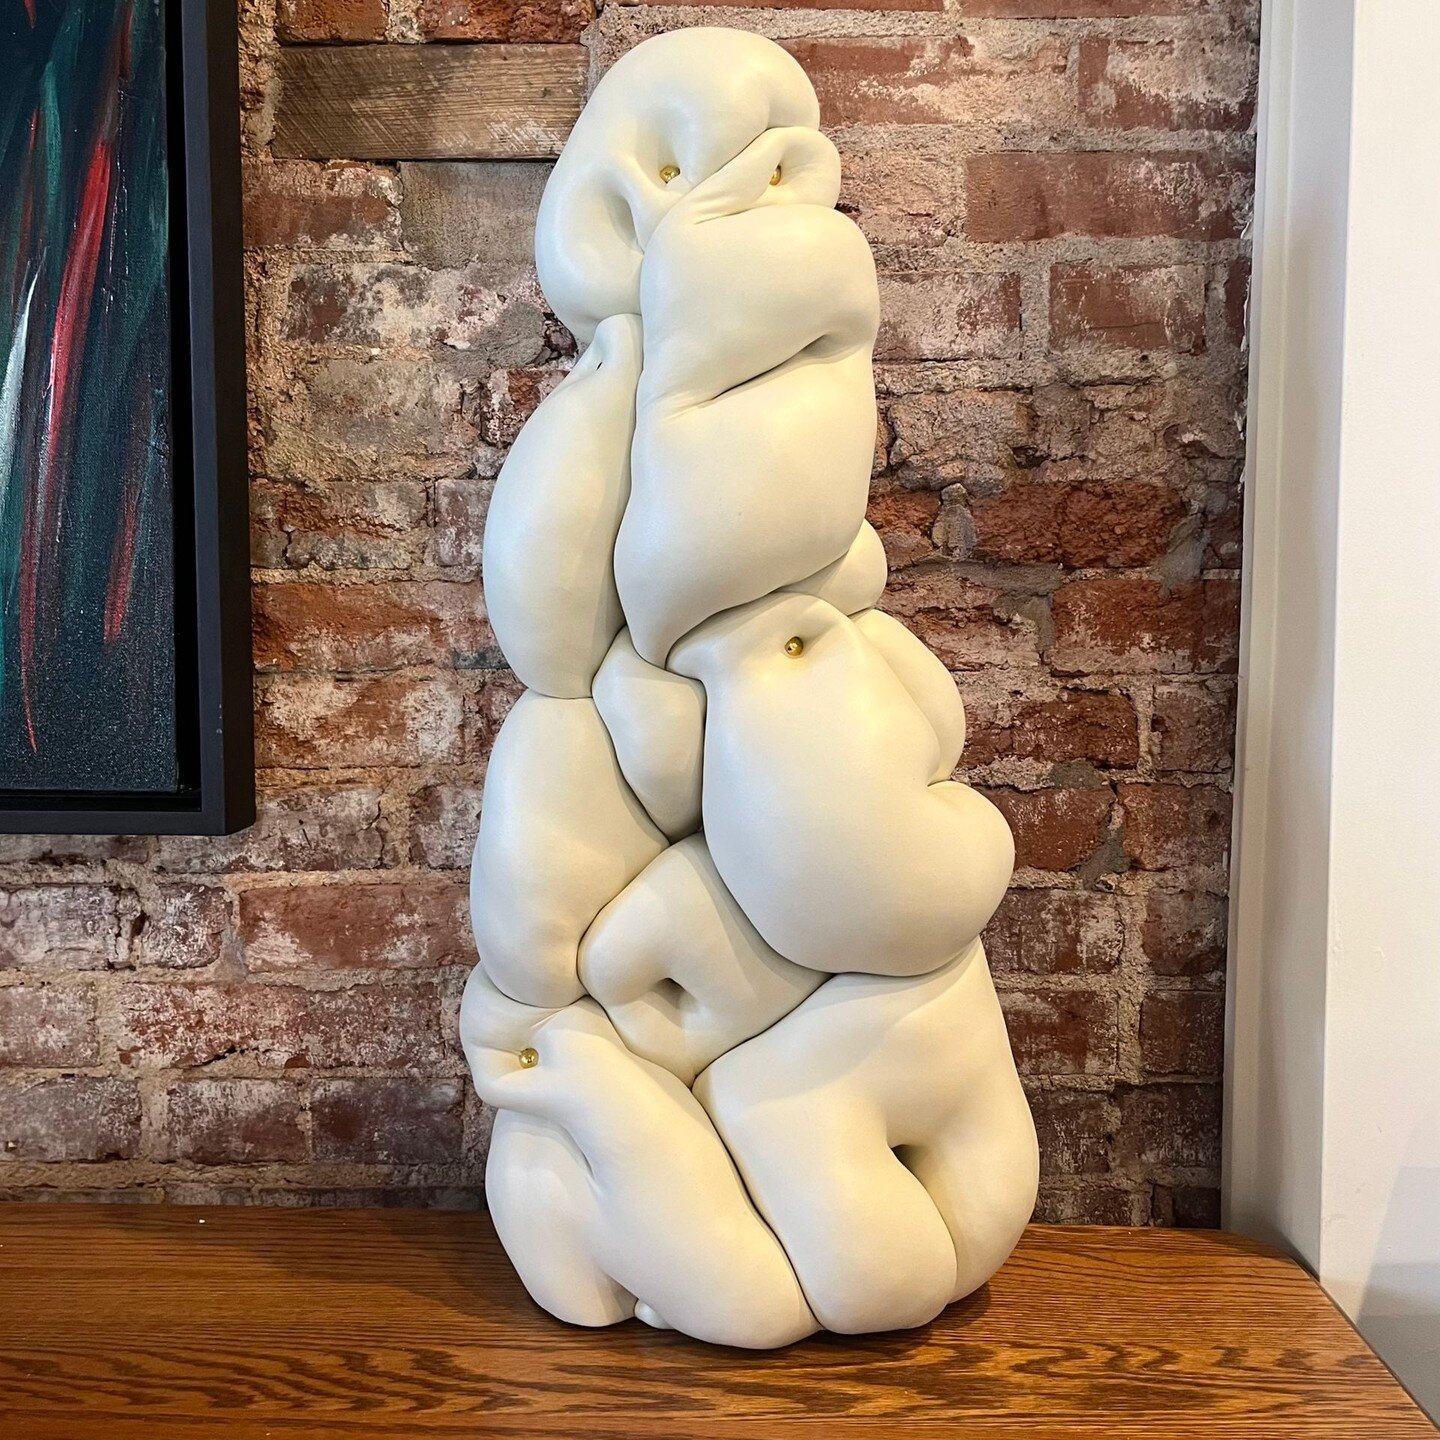 &quot;I Come Whole&quot; by E. Elhoffer. We love the use of upholstery tacks&ndash;they really add a whole new dimension to the piece.

#untitledfineart #stlart #stlouisart #cherokeestreet #cherokeestreetstl #interiordesign #interiors